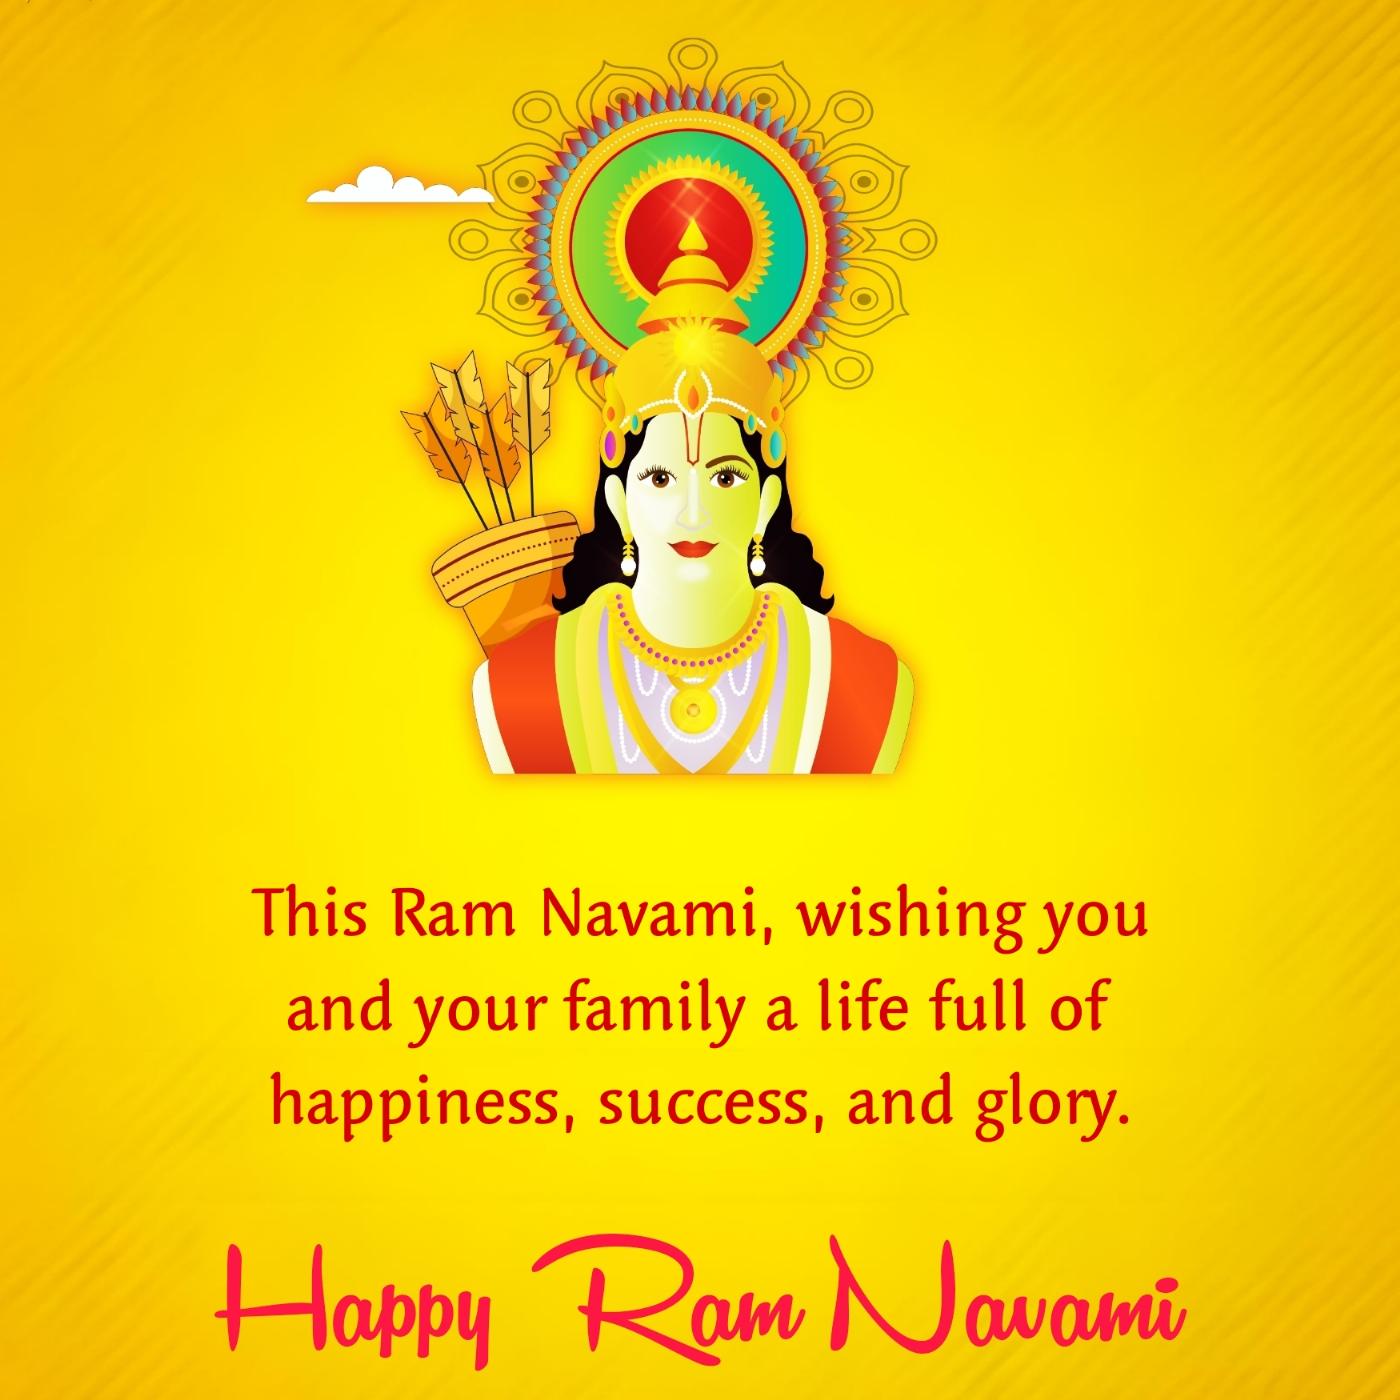 This Ram Navami wishing you and your family